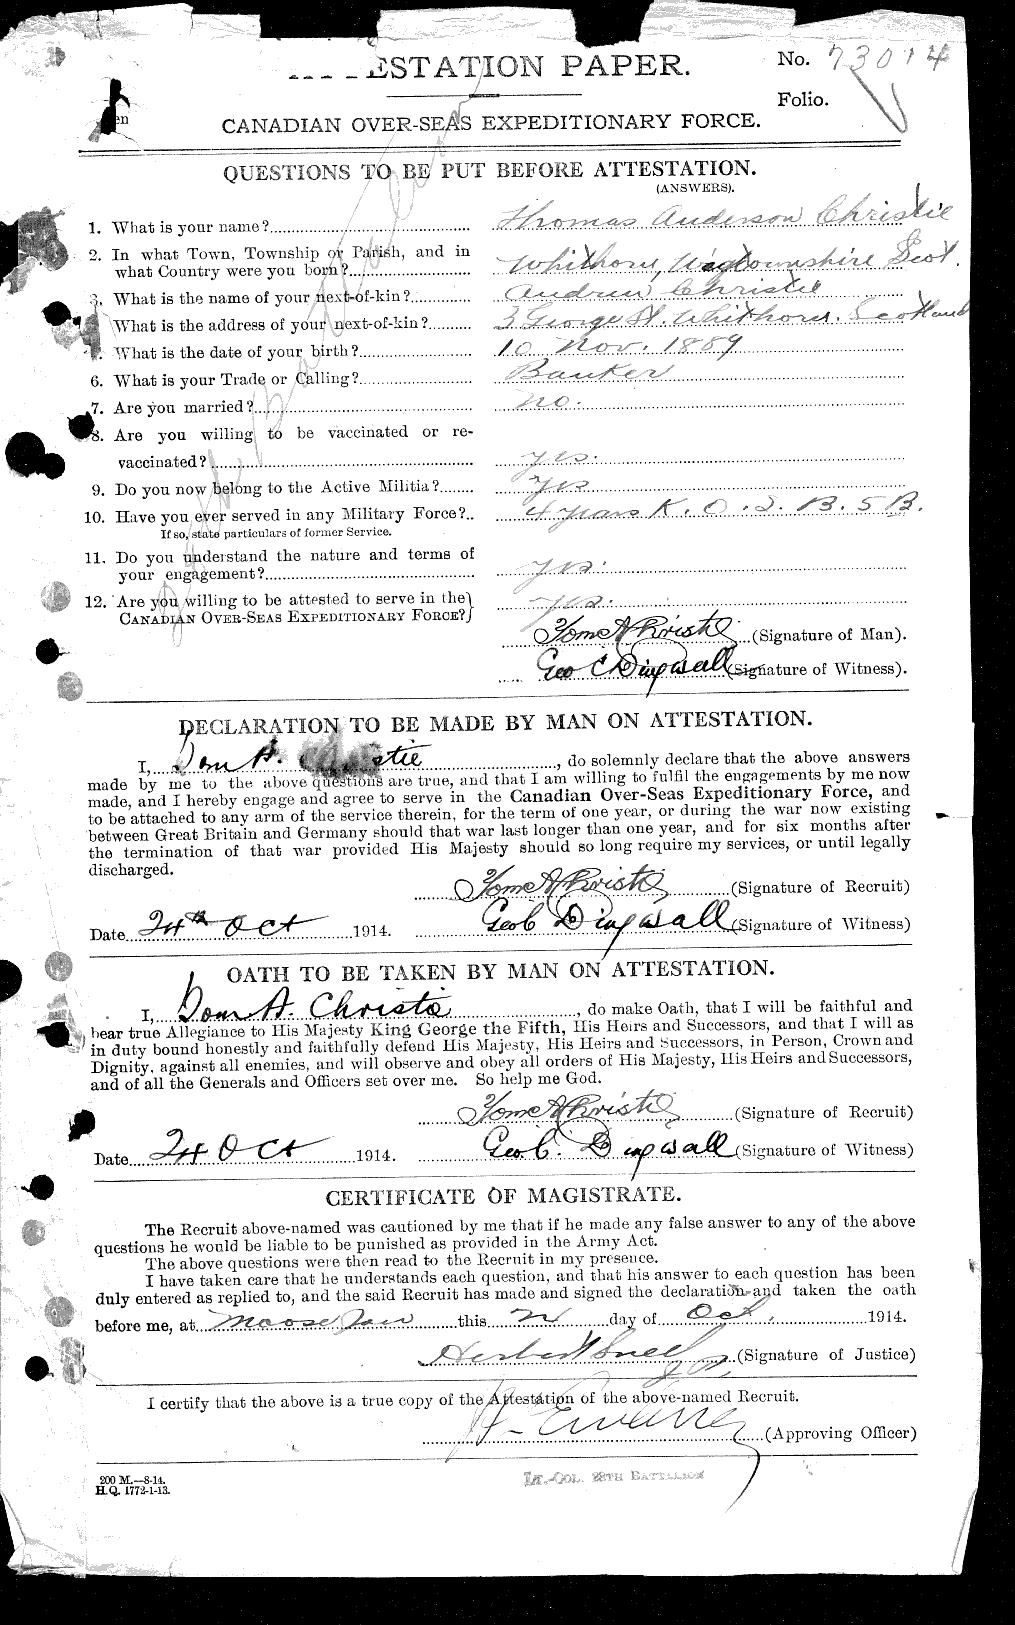 Personnel Records of the First World War - CEF 022073a